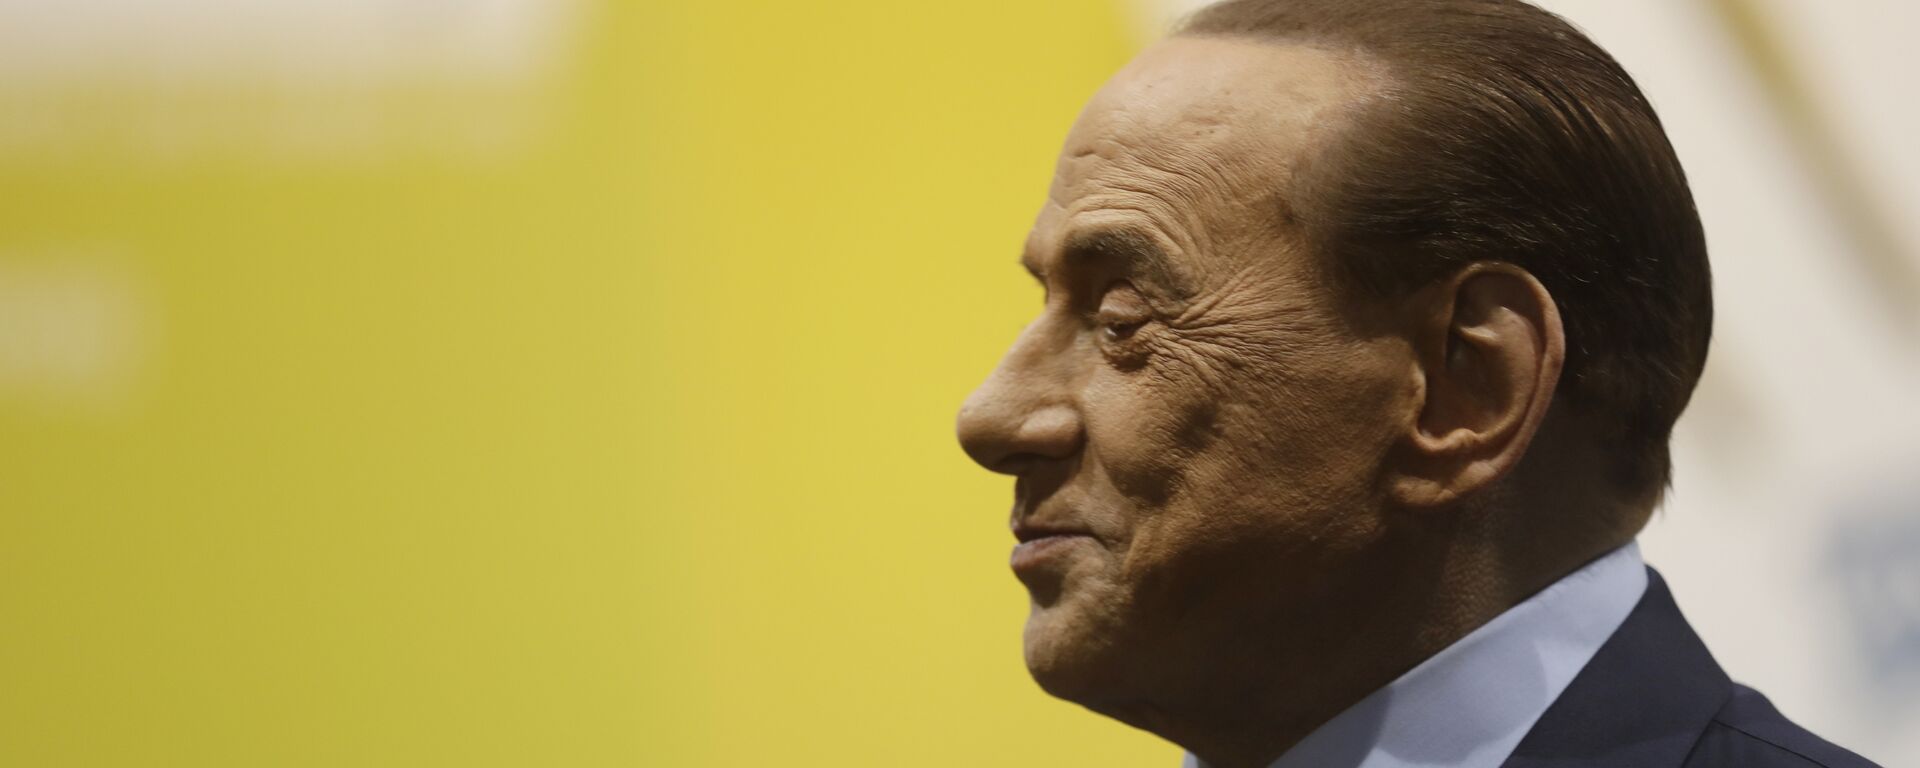 Former Italian premier Silvio Berlusconi attends the Seeds&Chips - Global Food Innovation summit, in Milan, Italy, Monday, May 8, 2017. United States former President Barack Obama will speak at the summit Tuesday. - Sputnik International, 1920, 01.09.2021